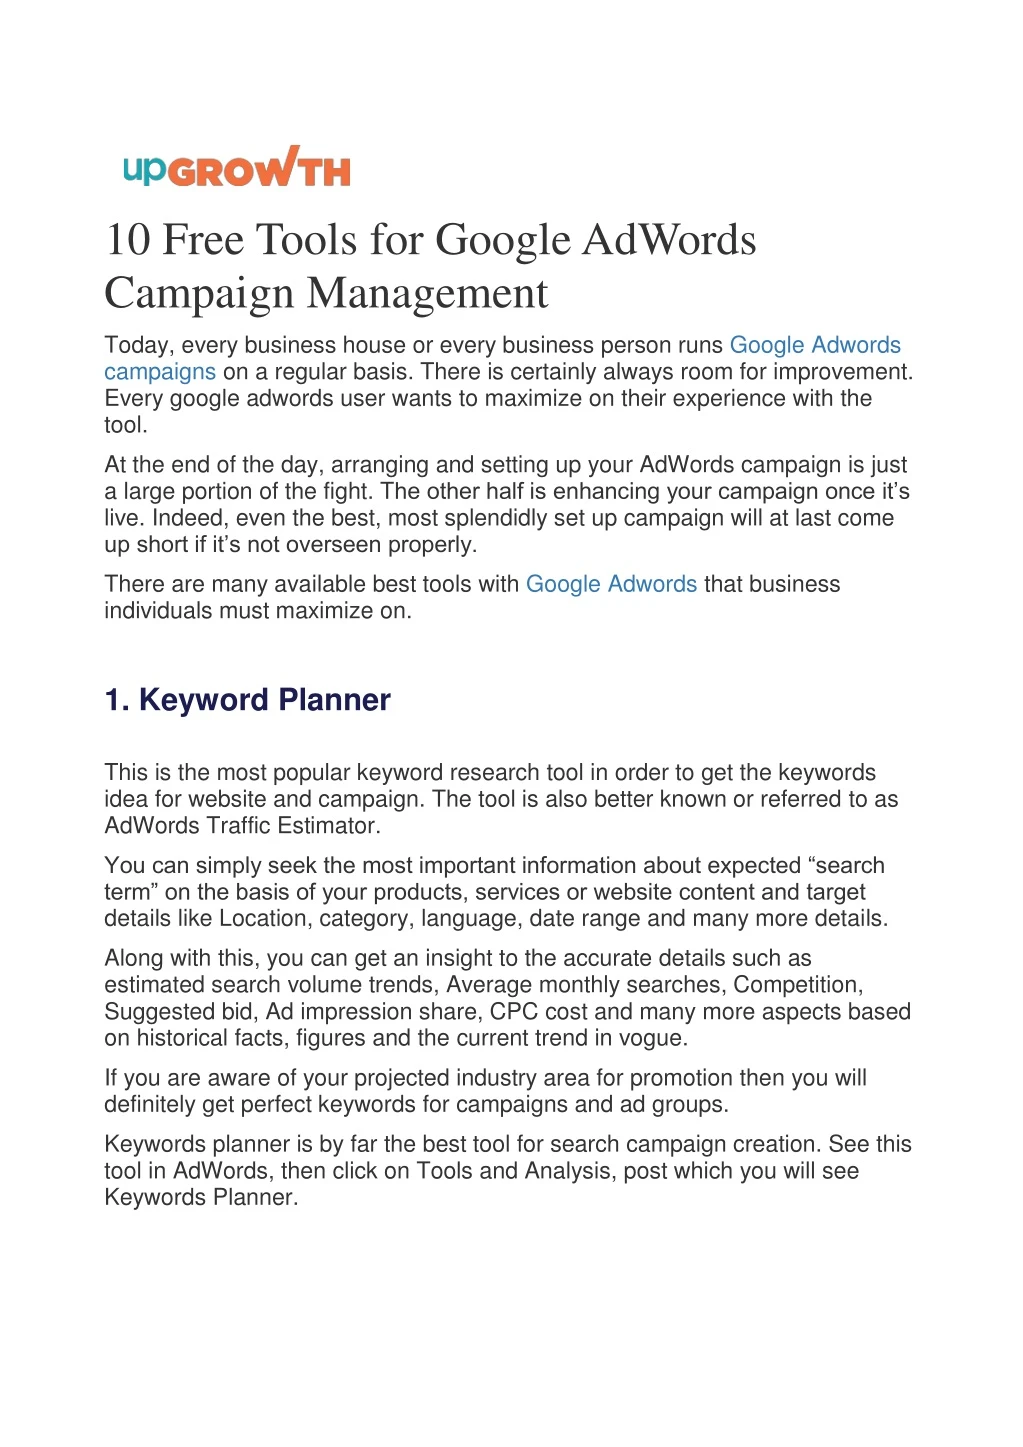 10 free tools for google adwords campaign